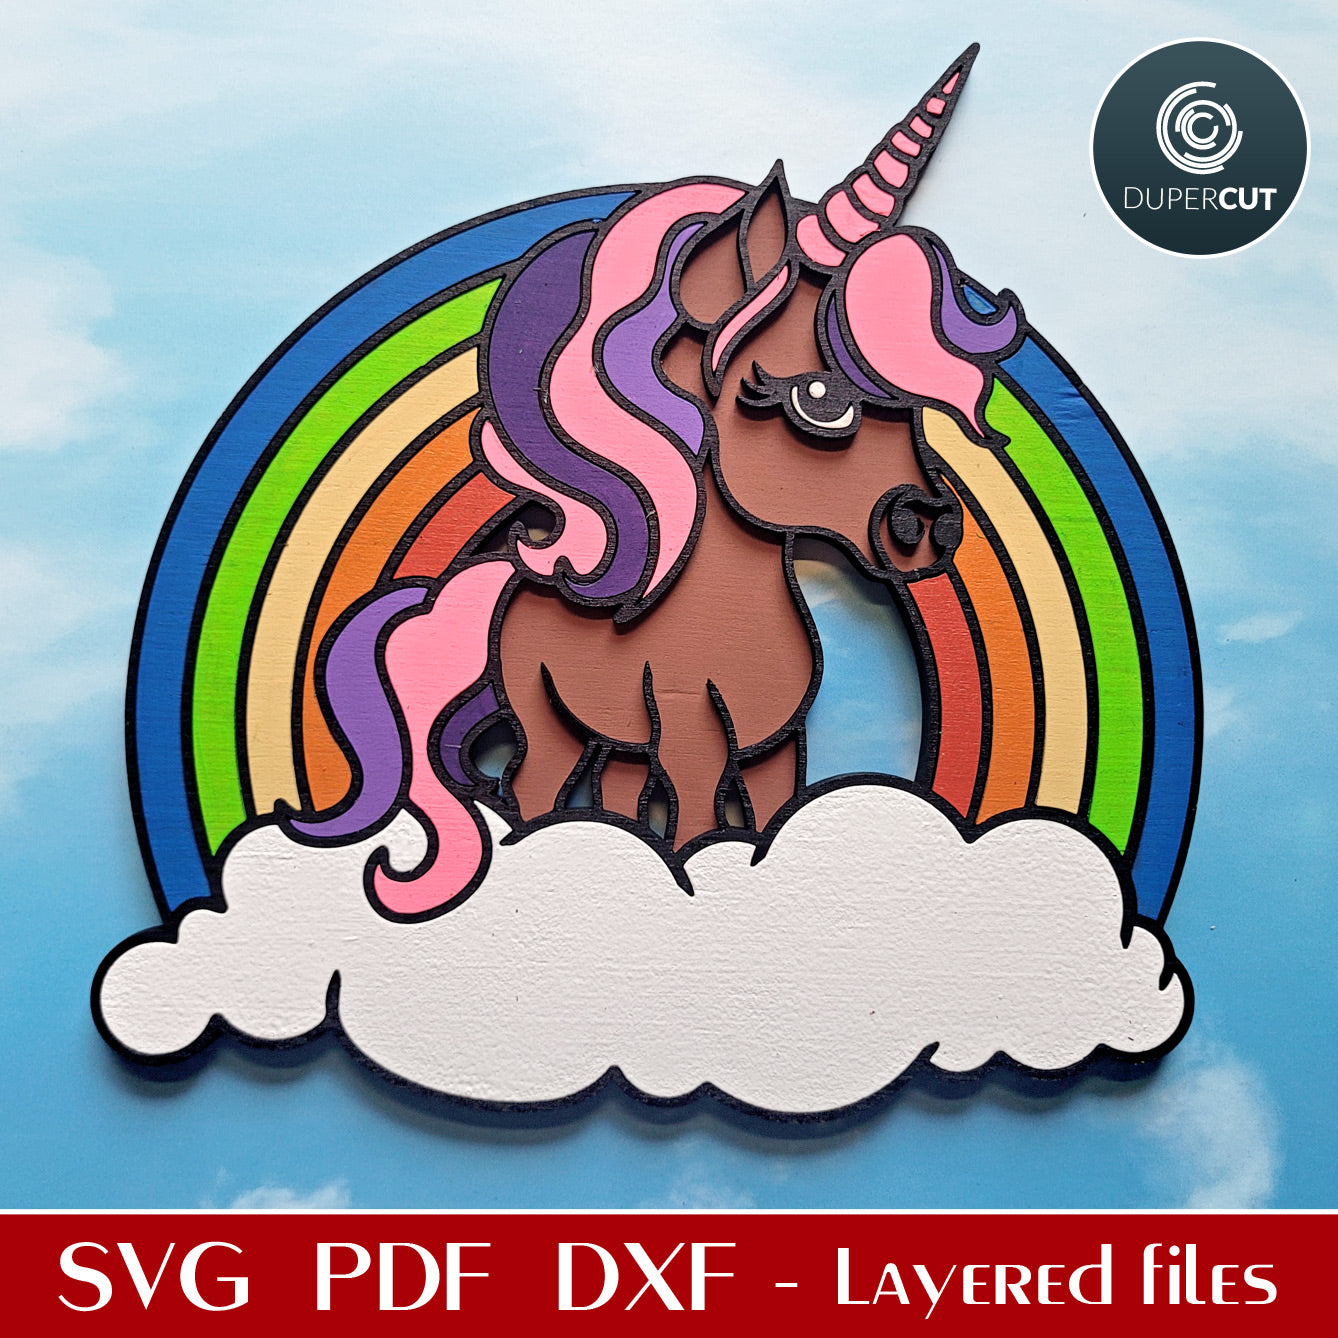 Unicorn with rainbow and clouds personalized kids room sign  - SVG DXF vector laser cutting files for Glowforge, Cricut, Silhouette, CNC plasma machines by www.DuperCut.com